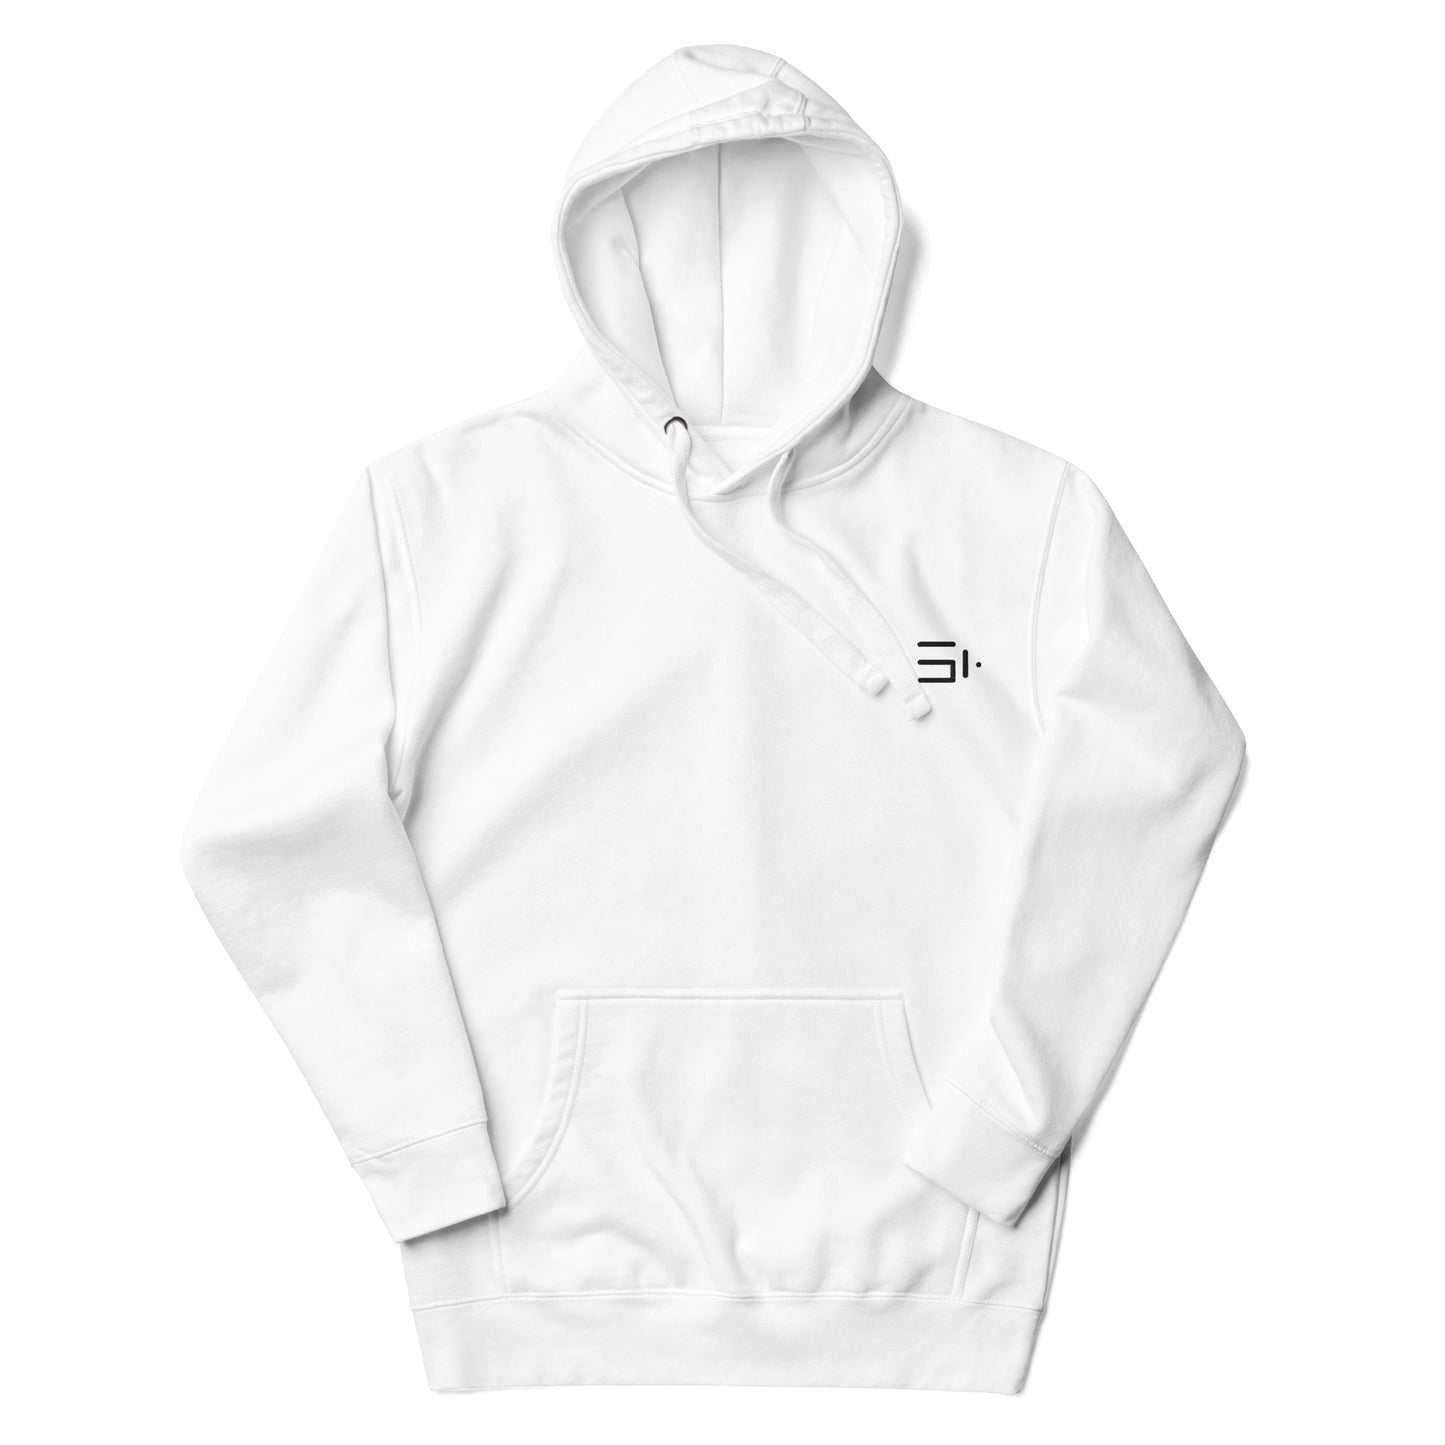 Unisex Hoodie Embroidery White